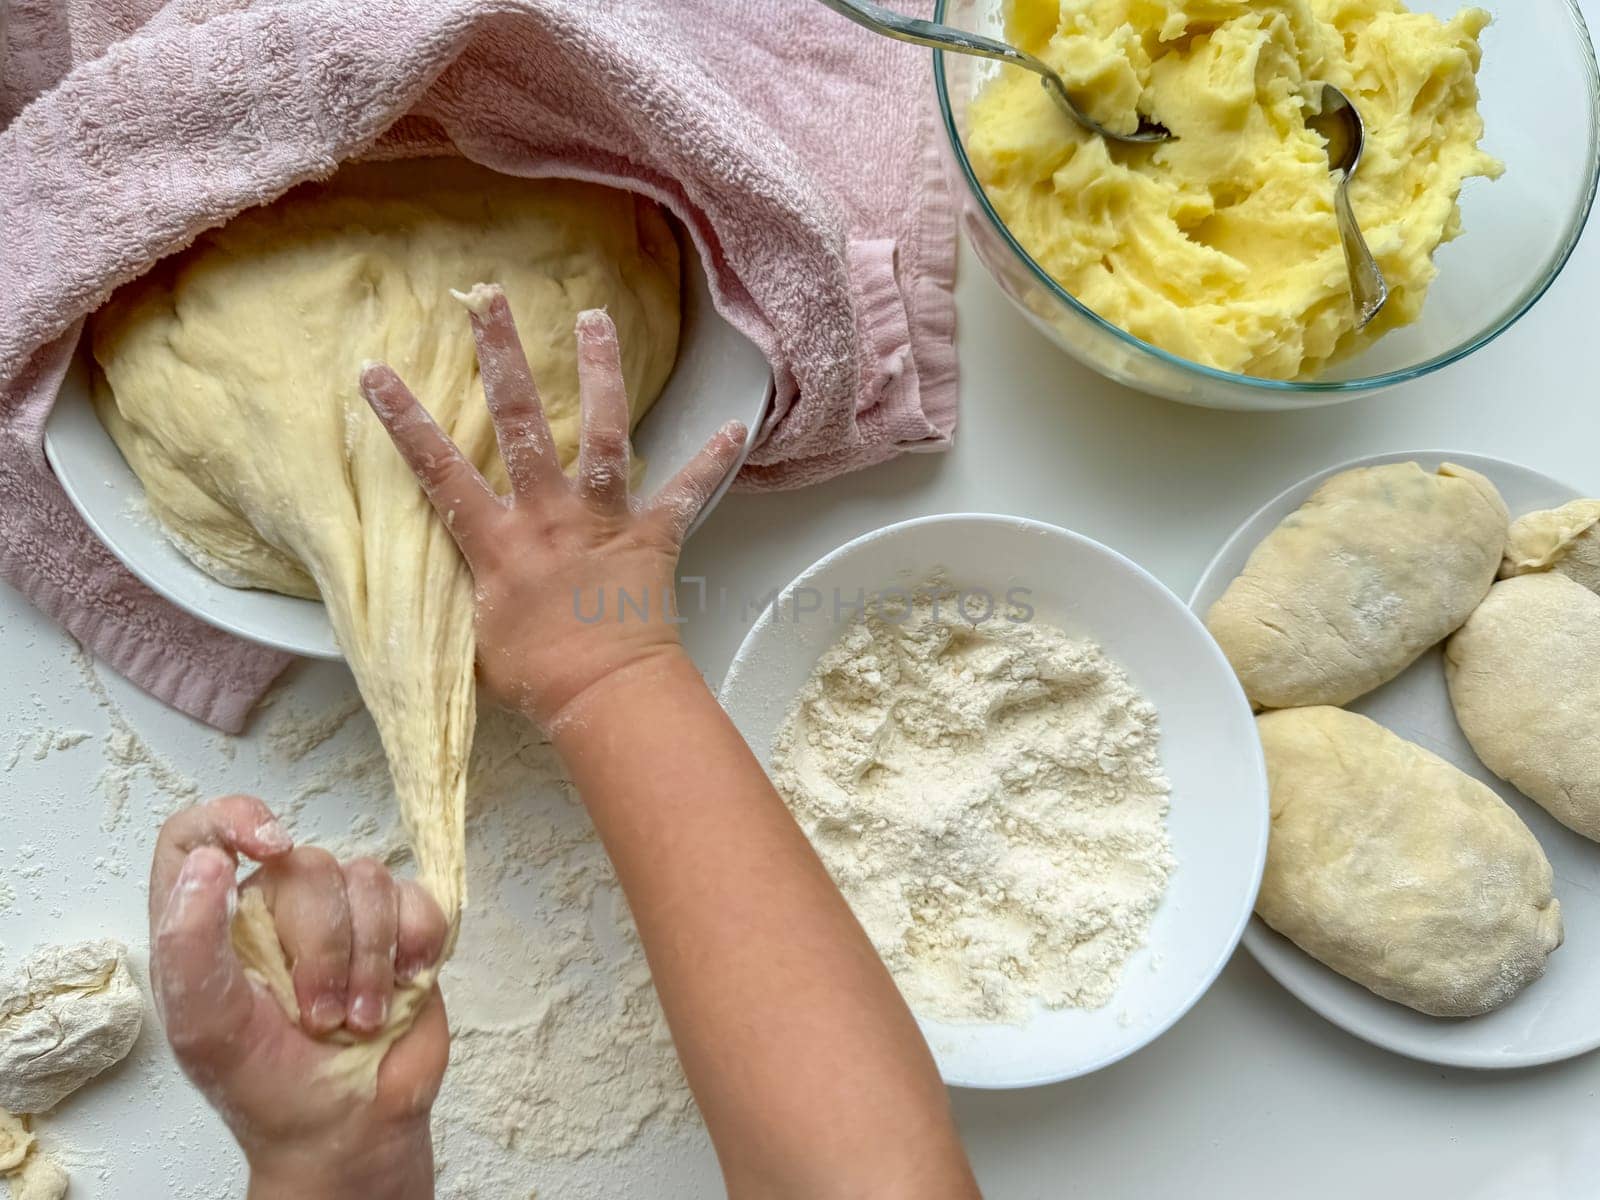 The hands of child knead the dough for making pies on white table, top view. by Lunnica